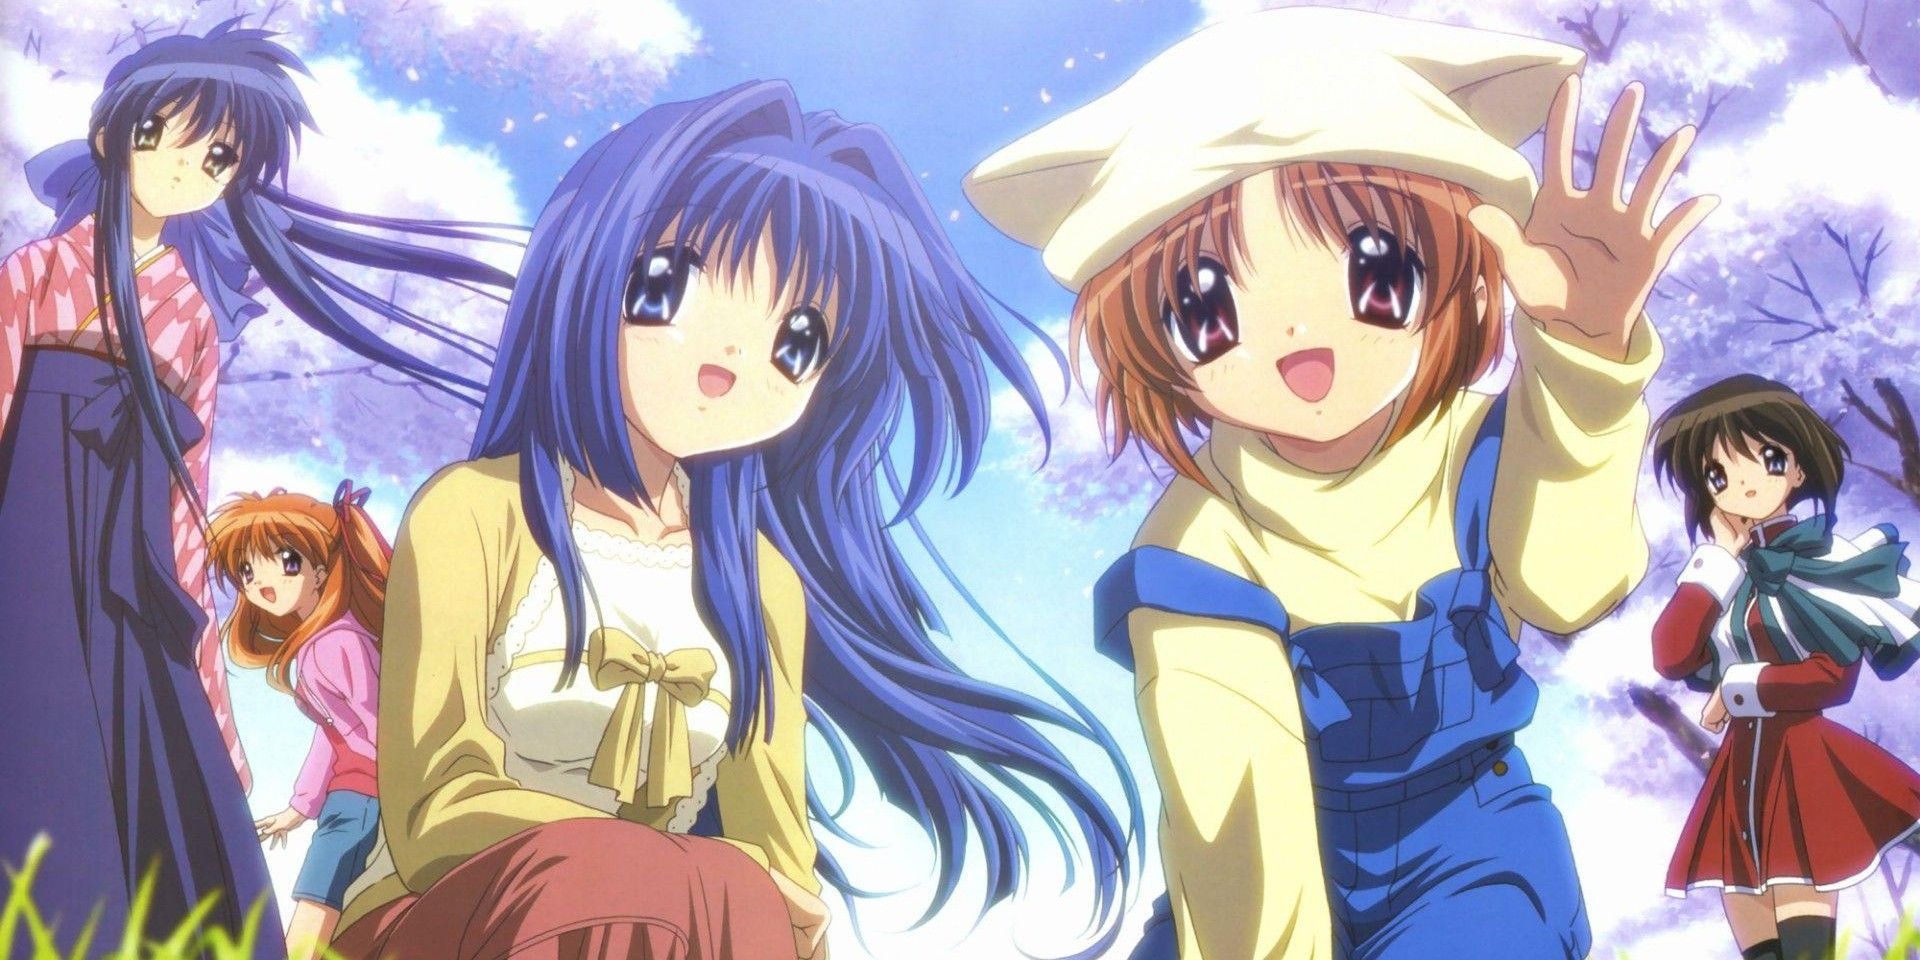 Kanon, Girls, Hand, threat wallpaper - Coolwallpapers.me!